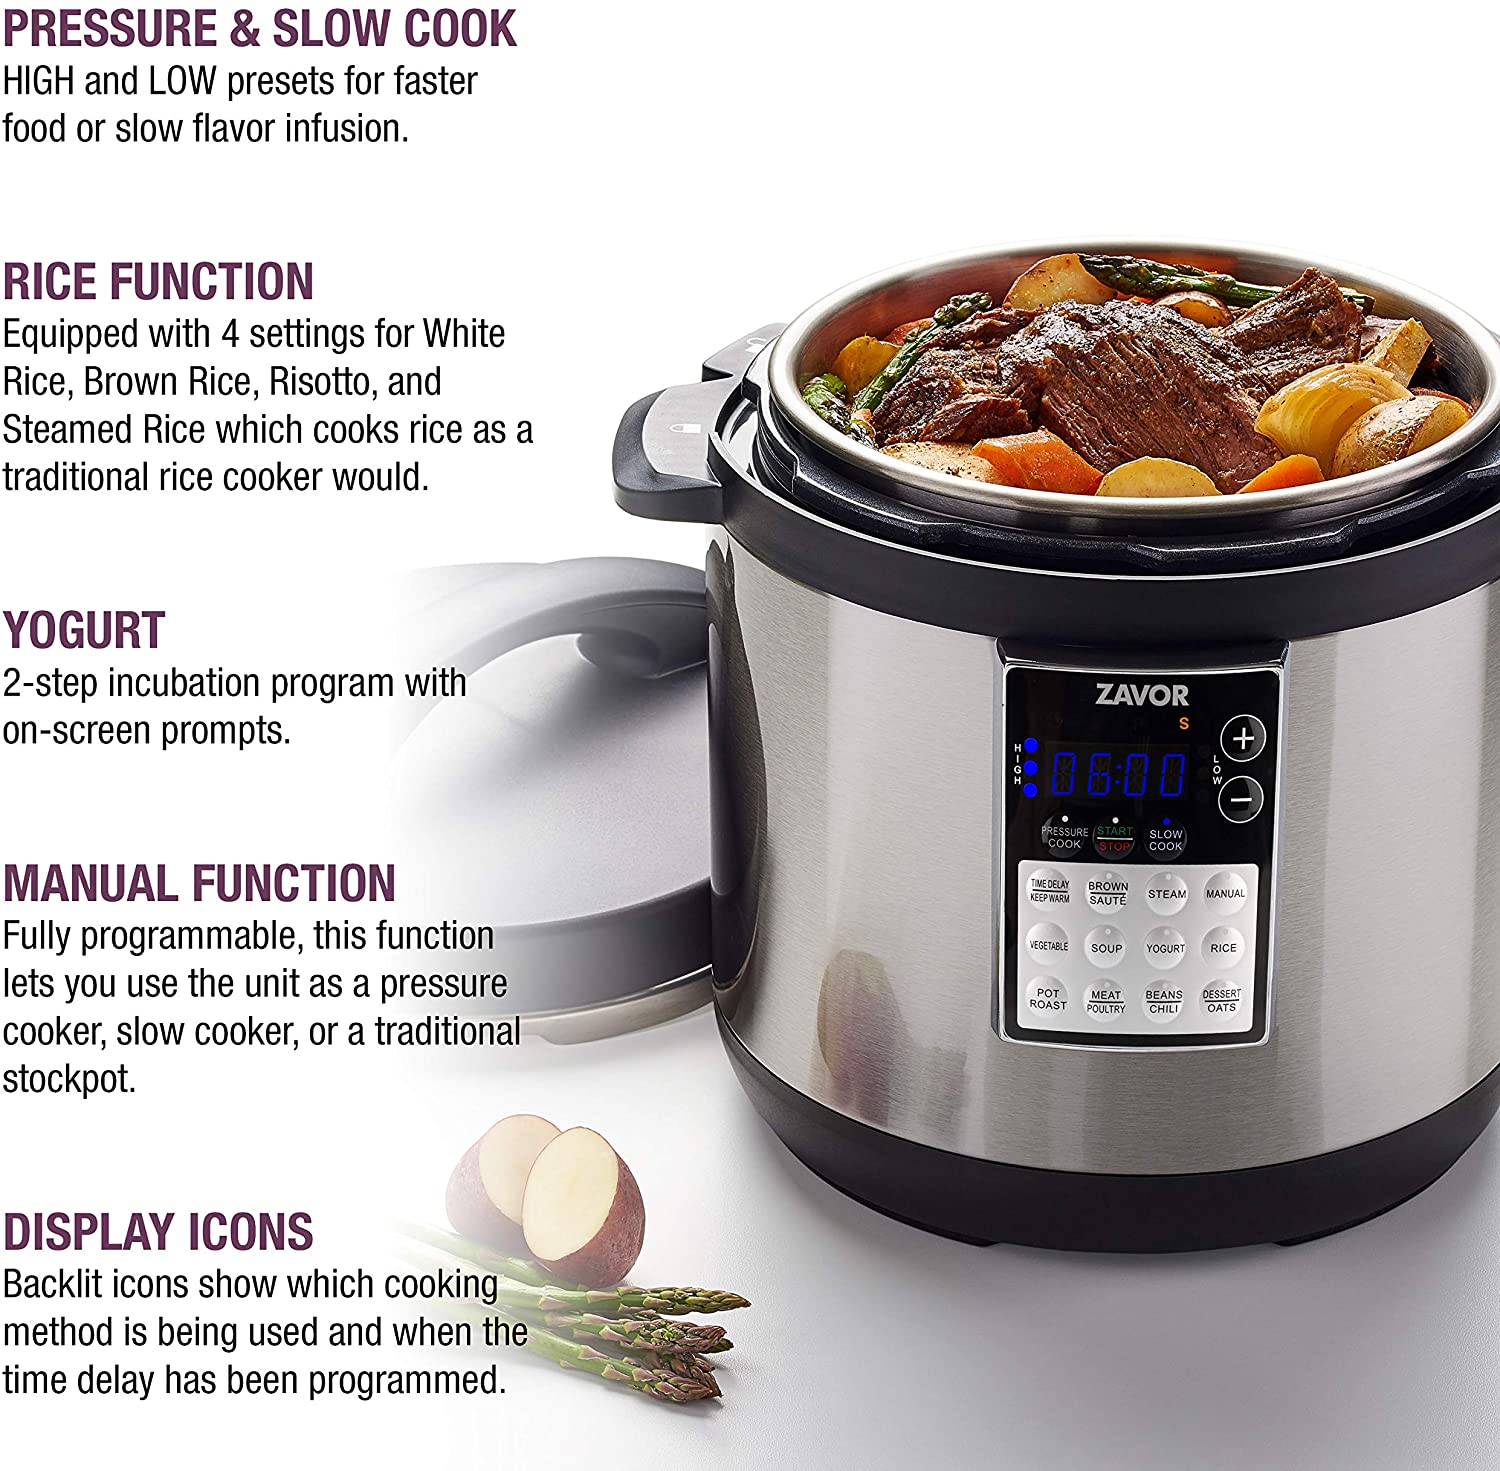 4 Qt. Digital Stainless Steel Slow Cooker